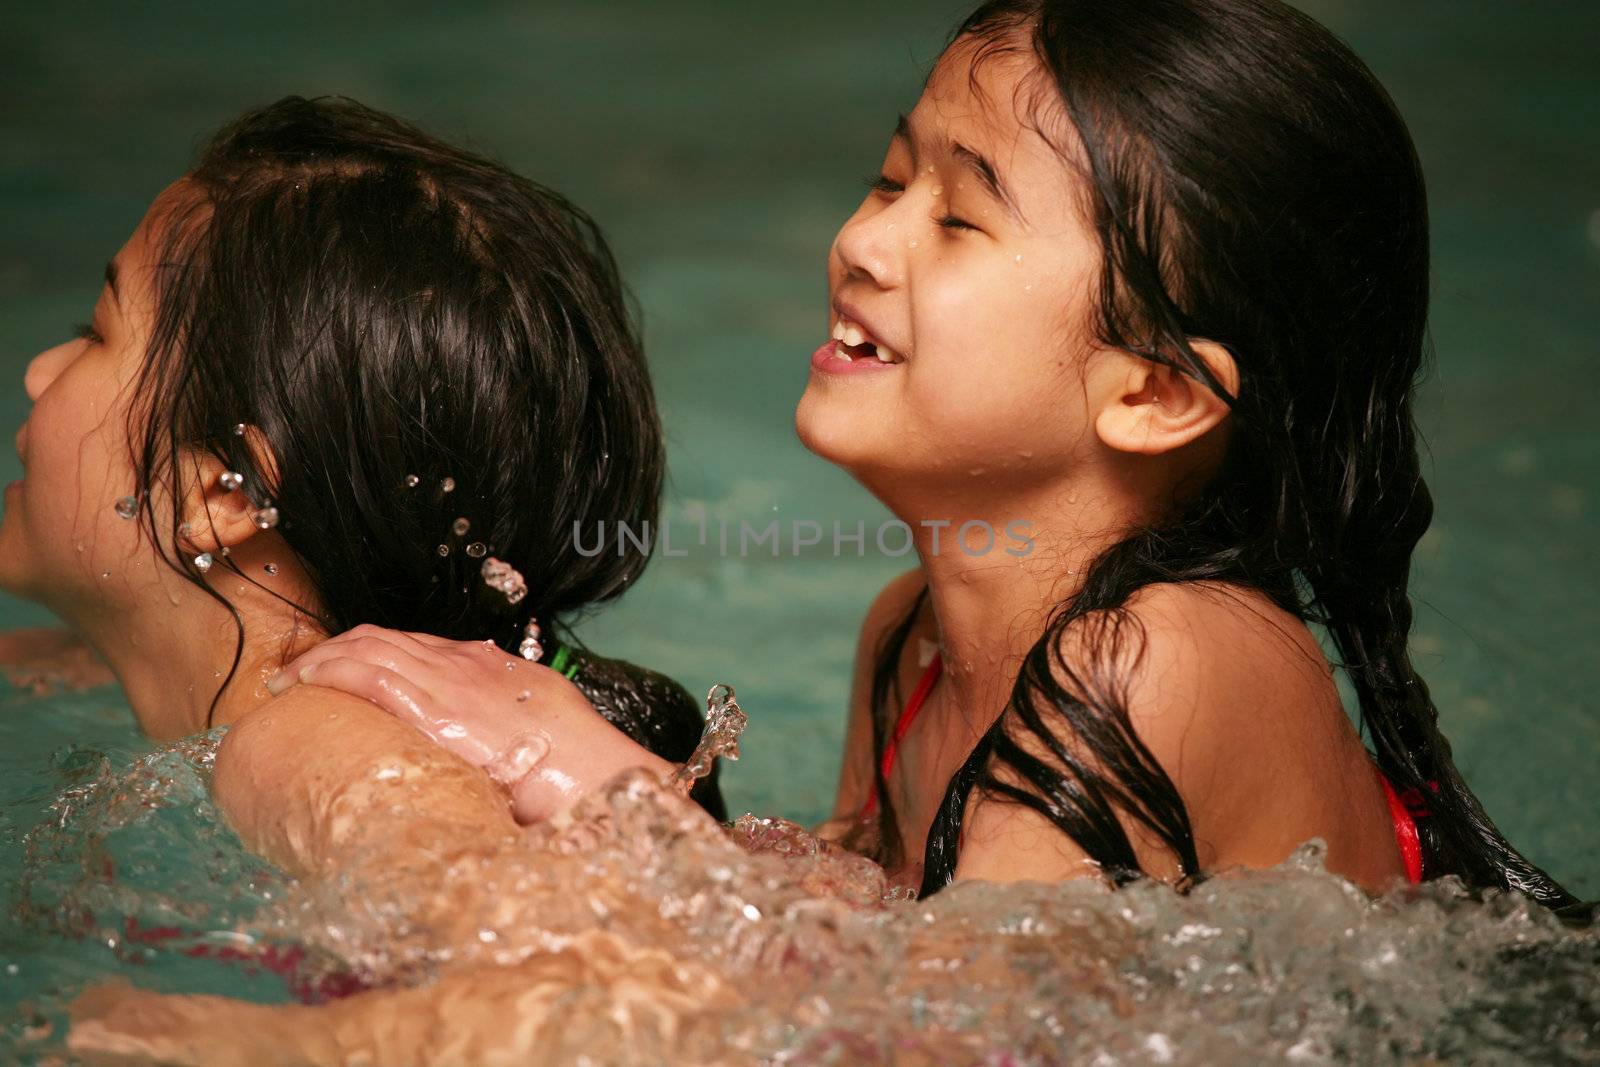 Two girls in swimming pool playing together